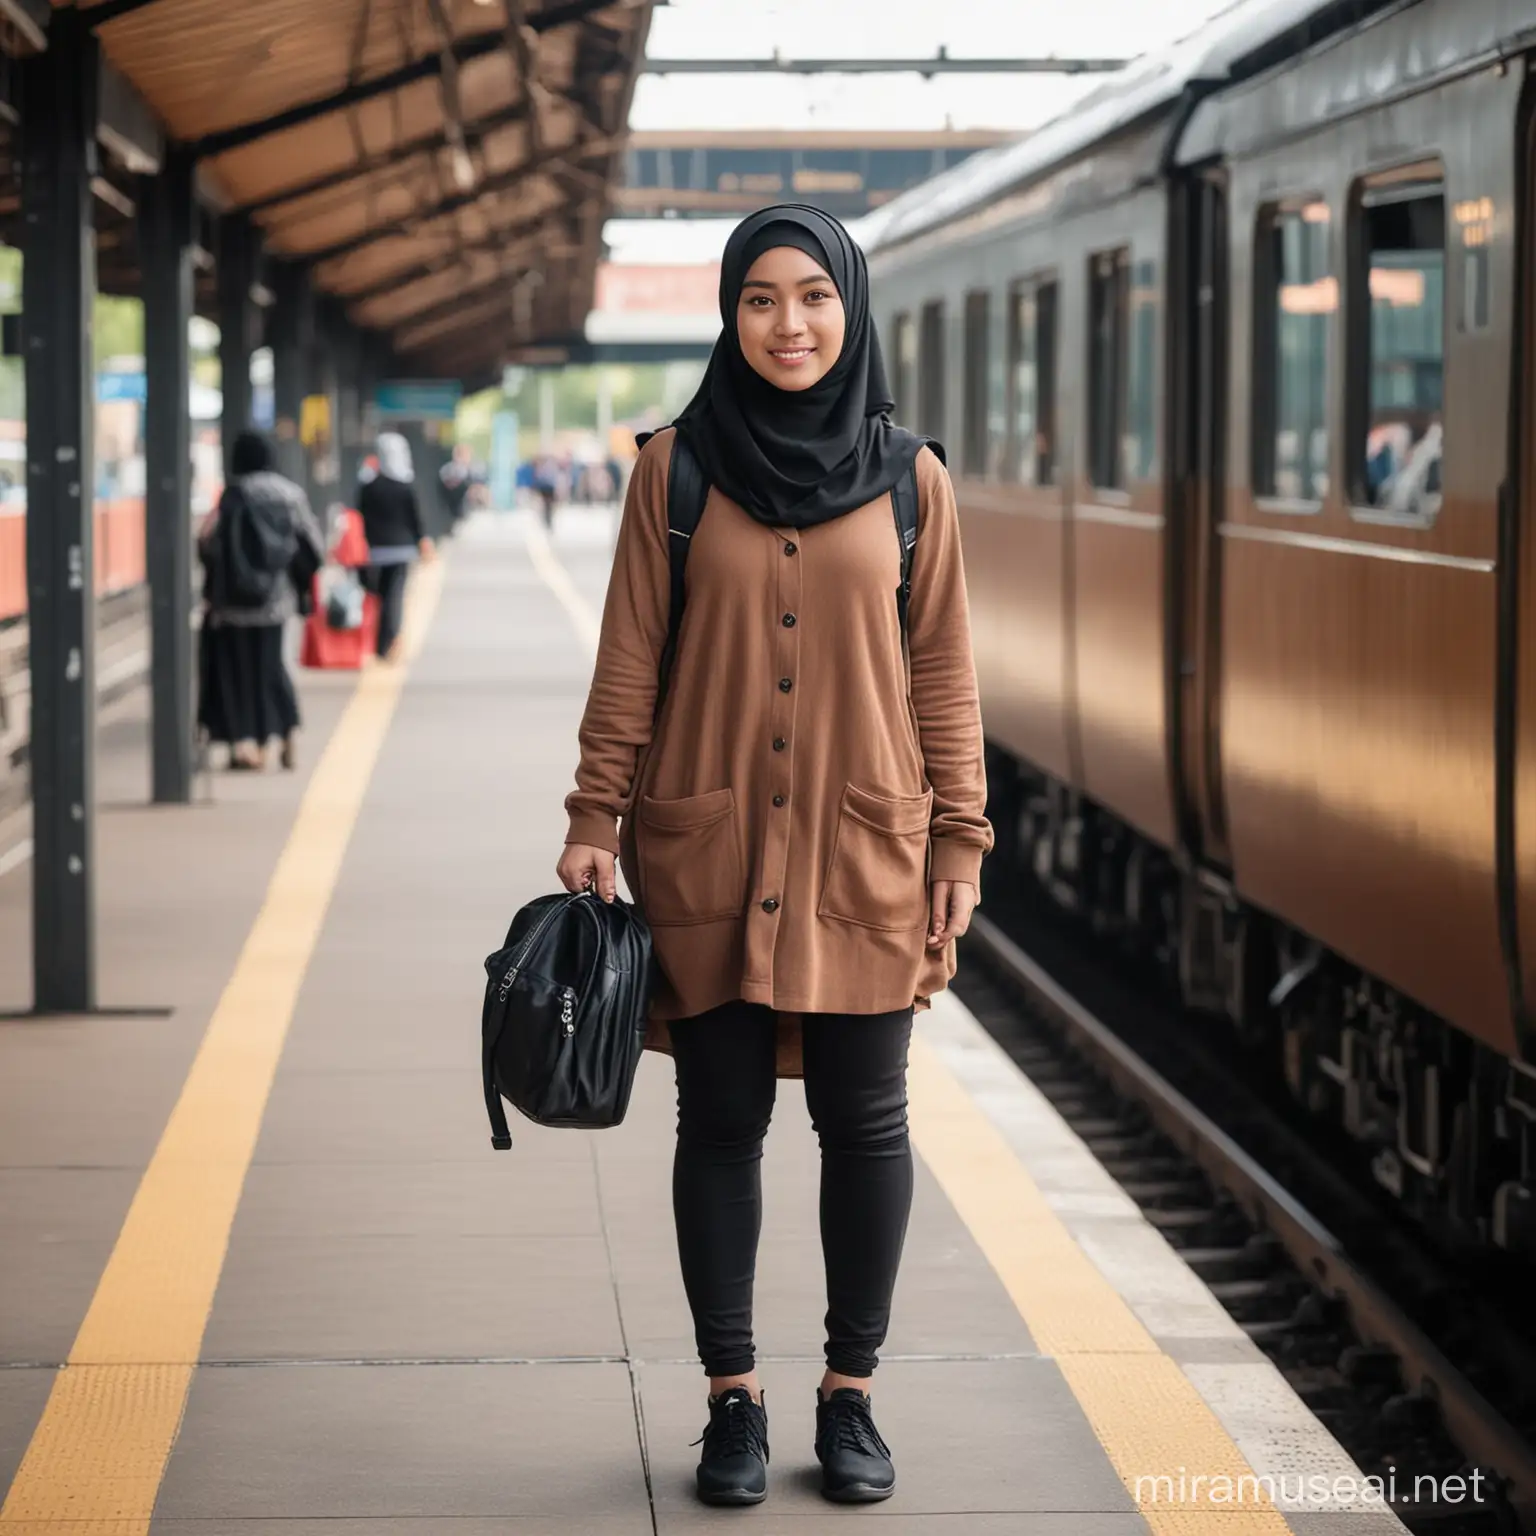 An Indonesian woman wearing a black hijab, wearing a brown cardigan, and wearing black leggings and a small black backpack. Standing at the train station